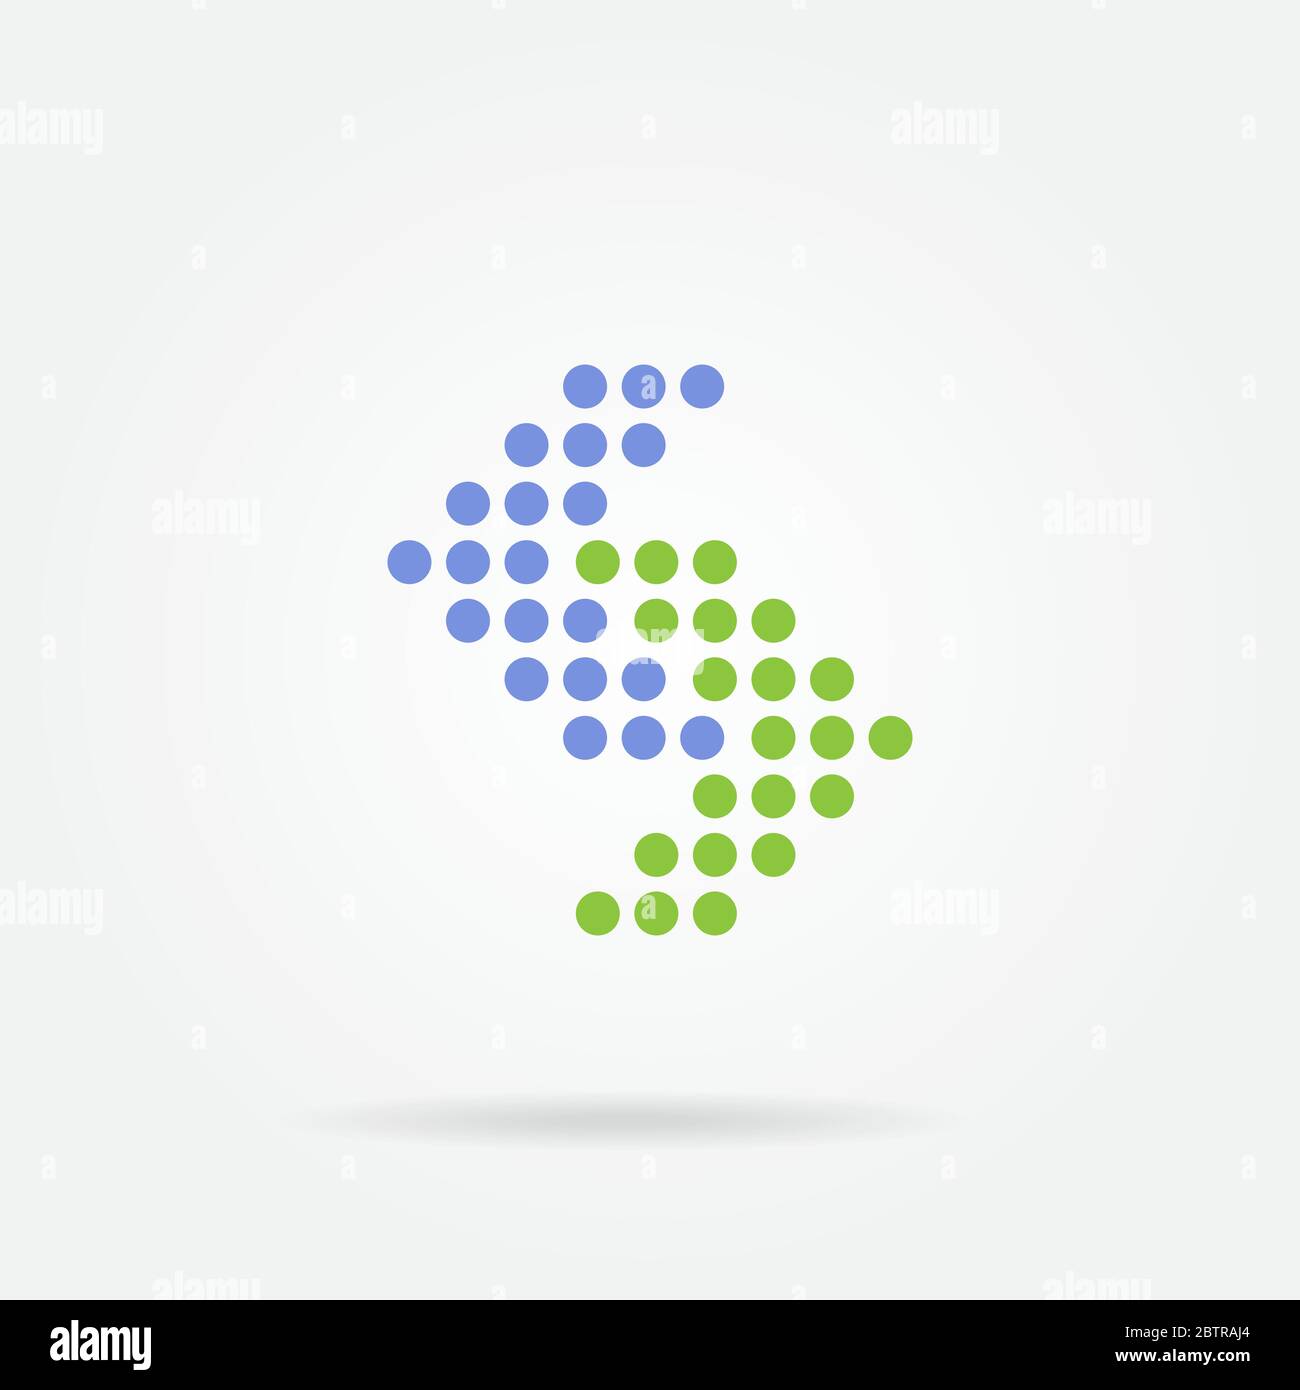 Dot arrow blue and green icon. Halftone effect. Isolated graphic element. Stock - Vector illustration. Stock Vector